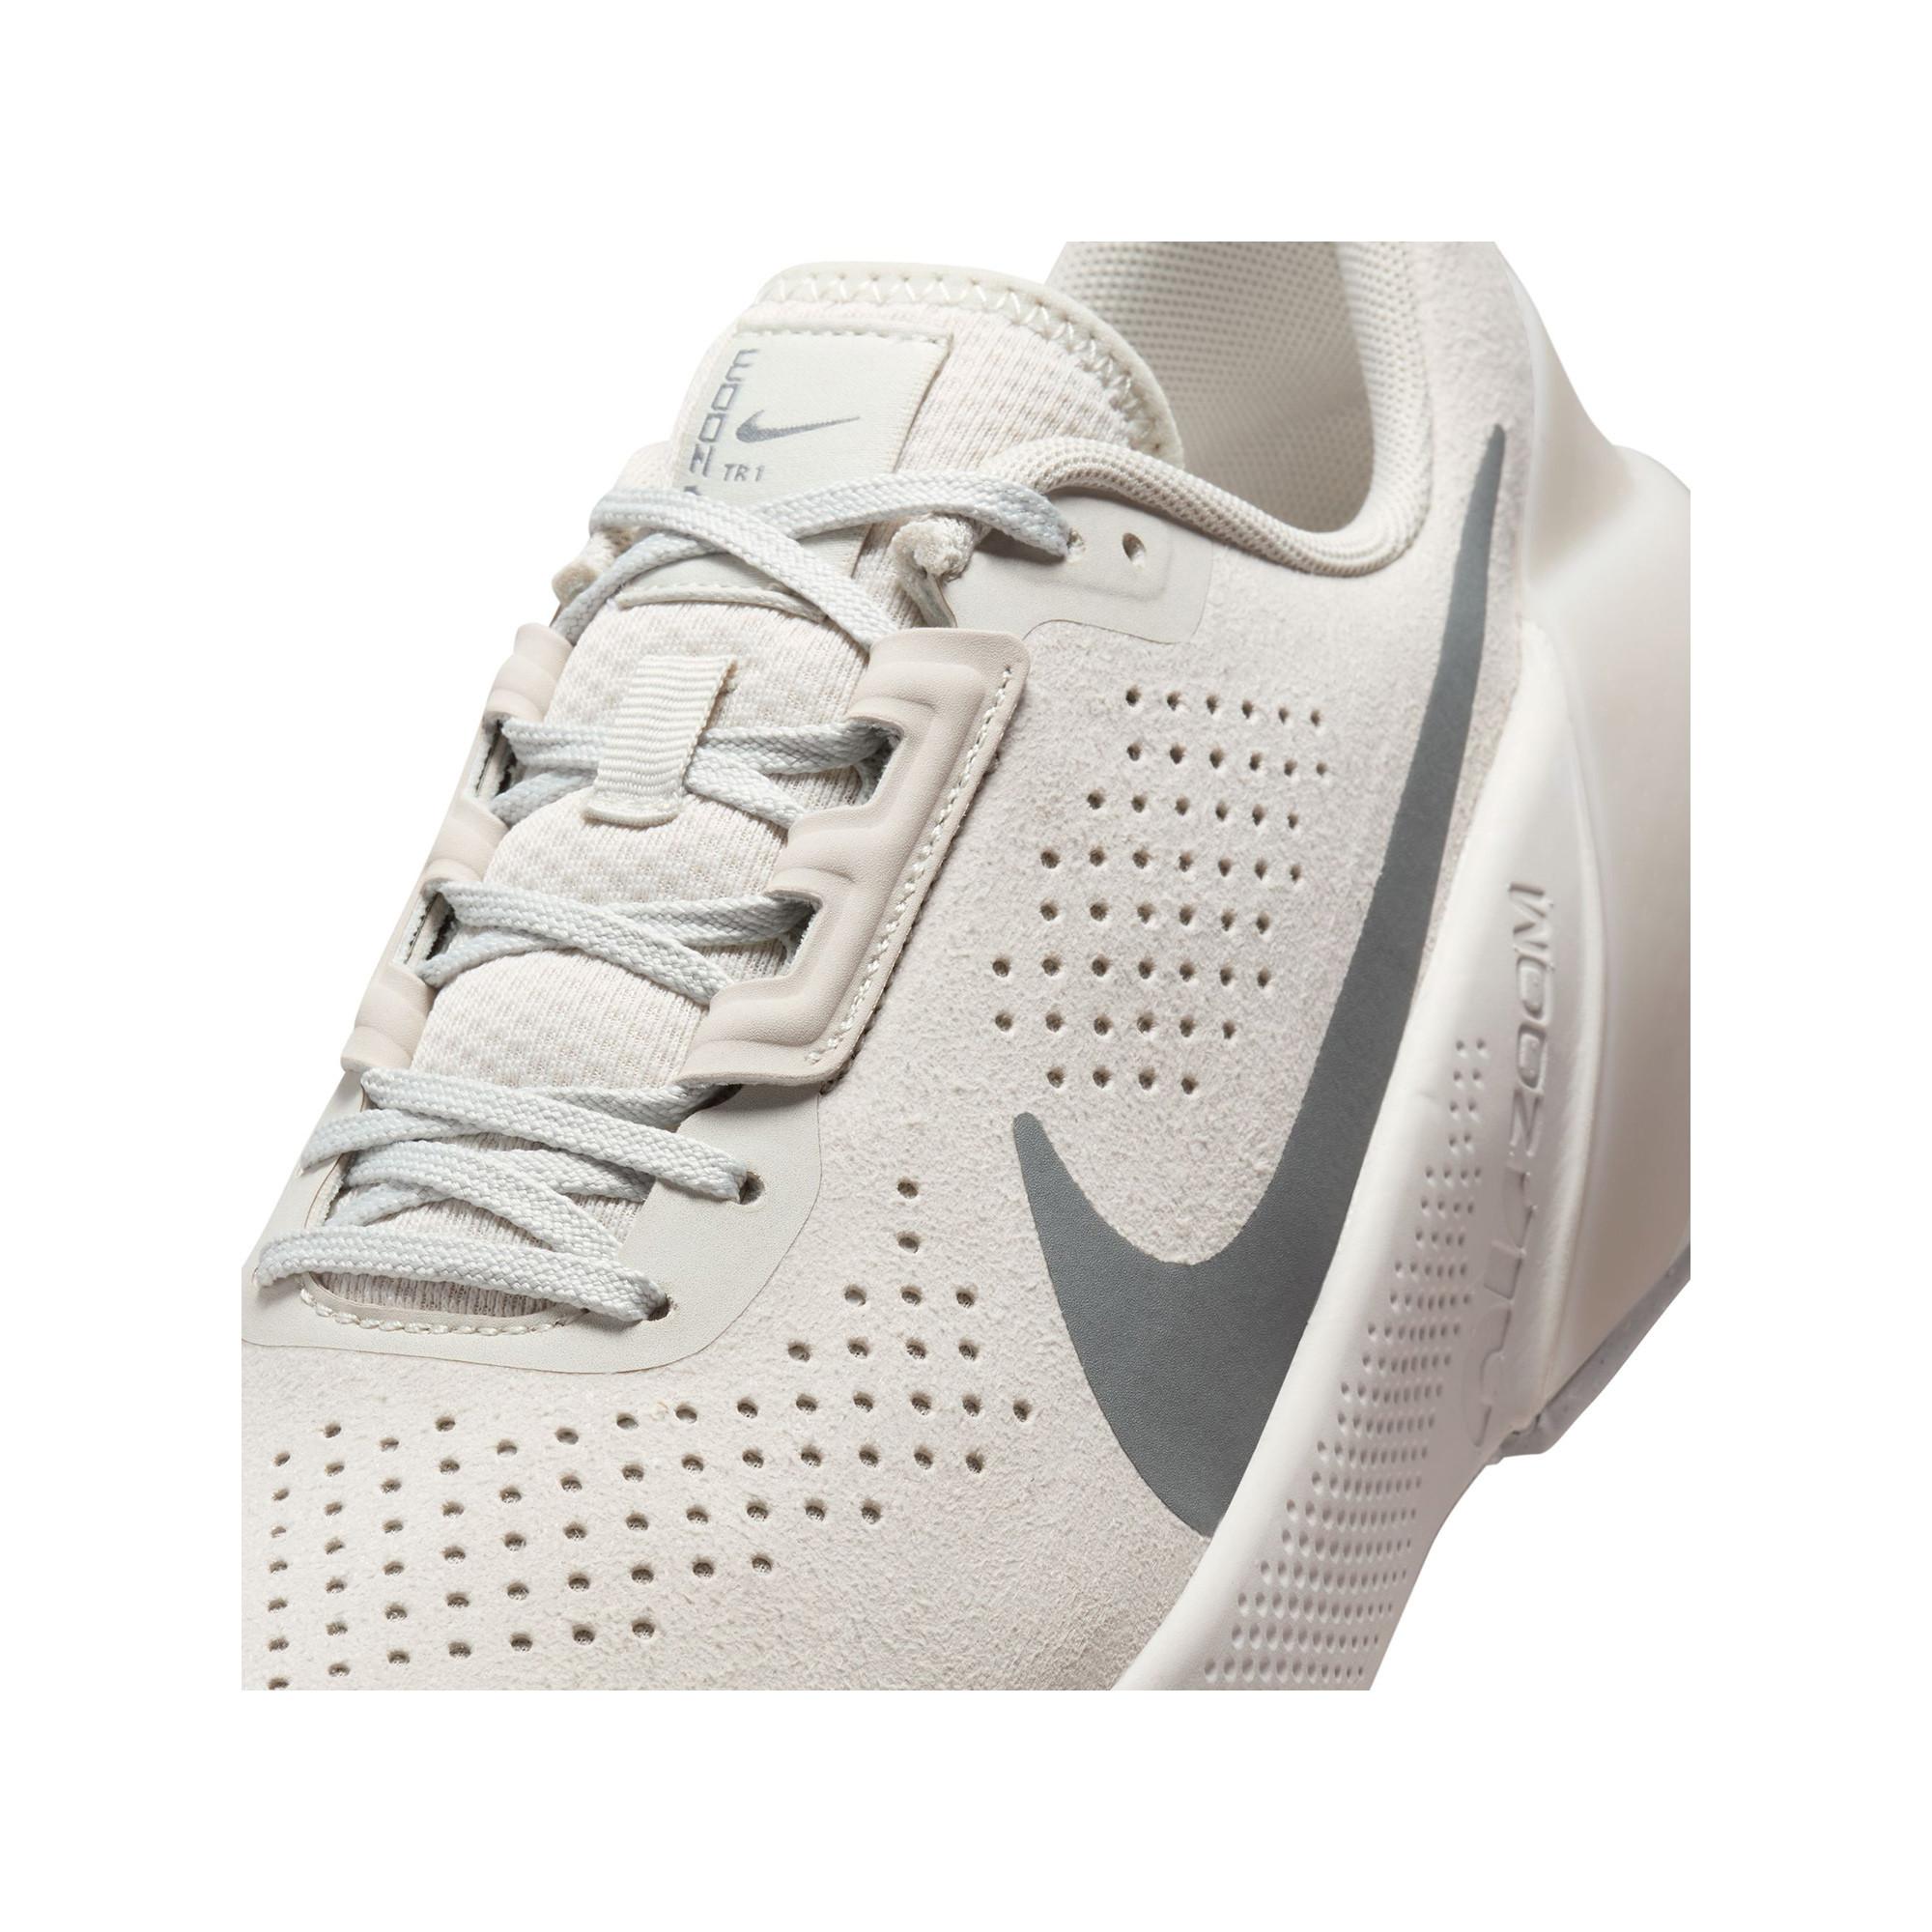 NIKE Air Zoom TR1 Fitness-Schuhe 